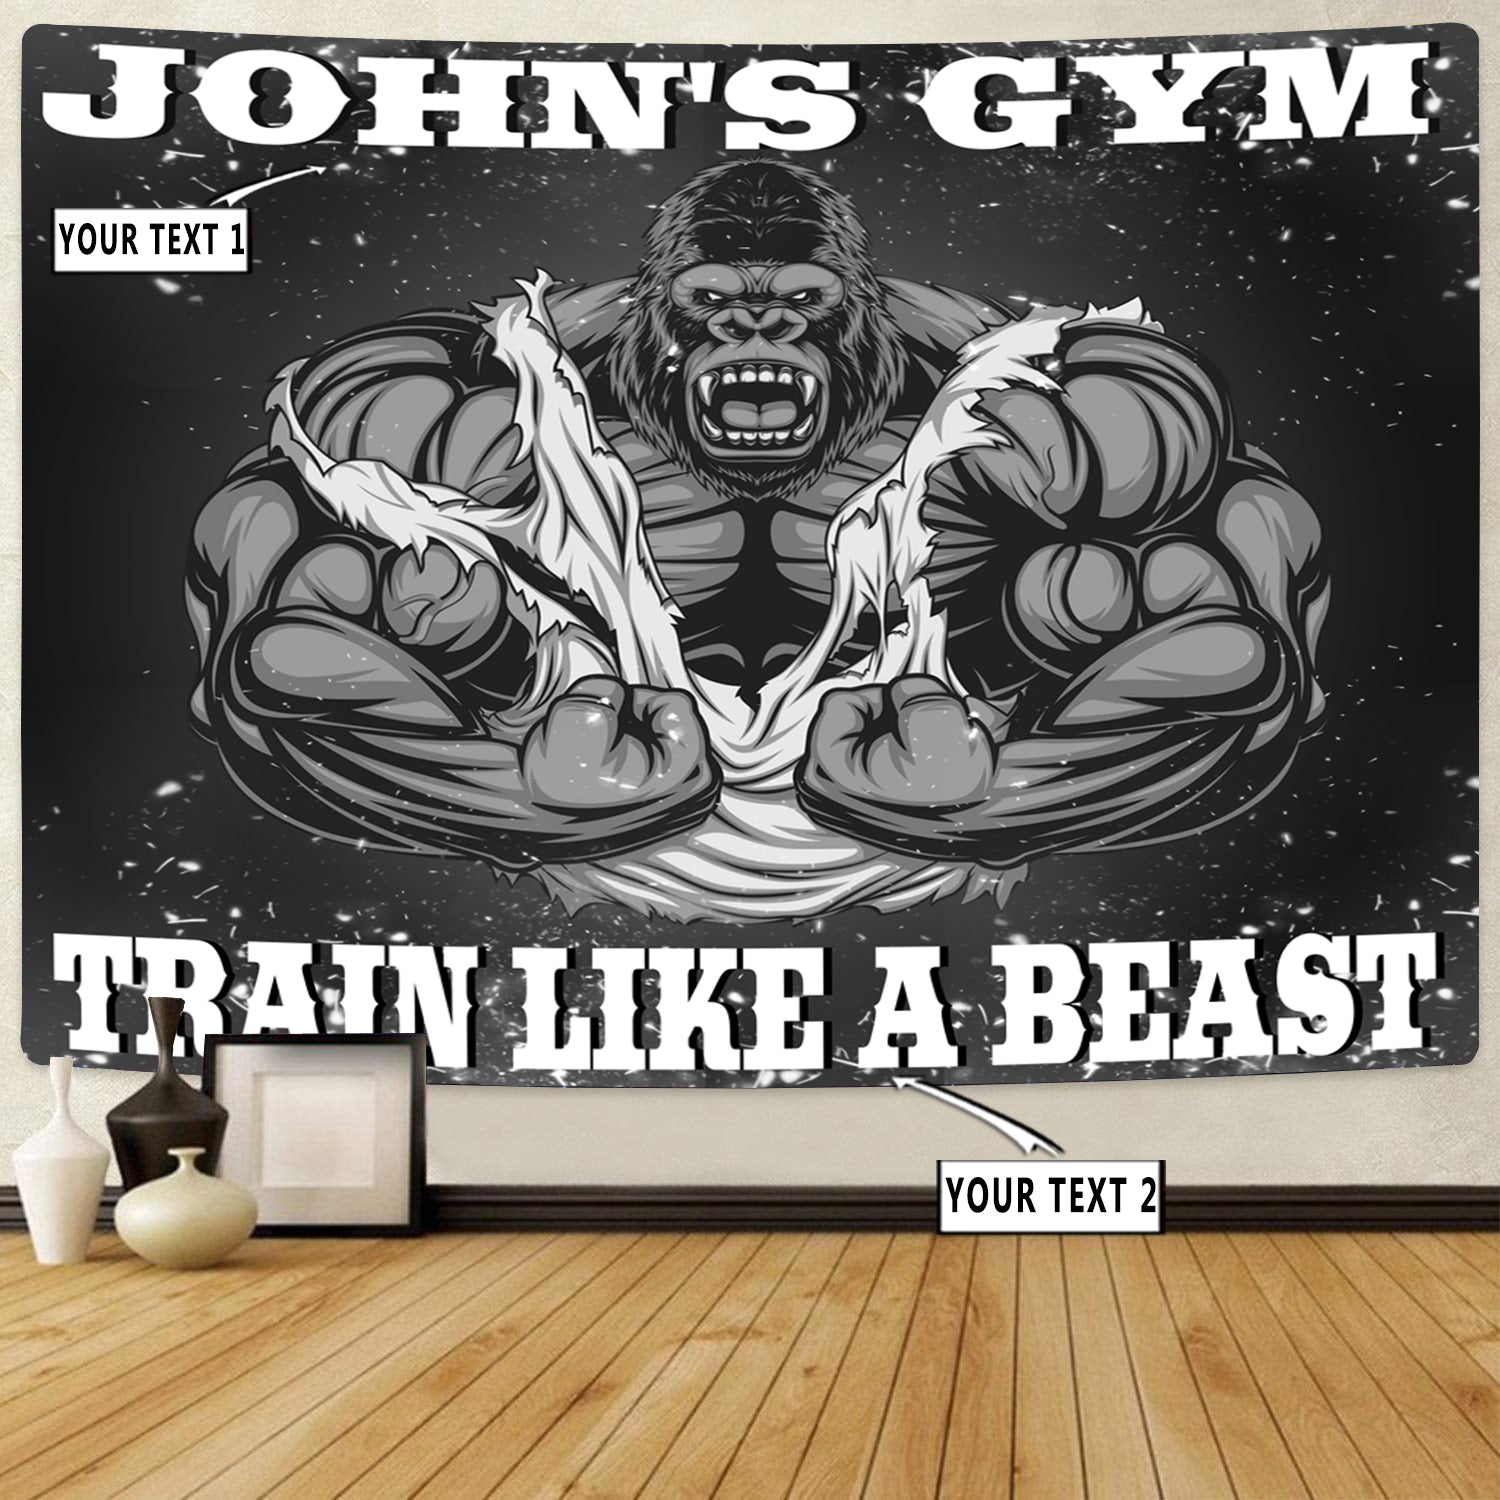 Calling all Gymrats to use this !!, Gallery posted by Joannehsm